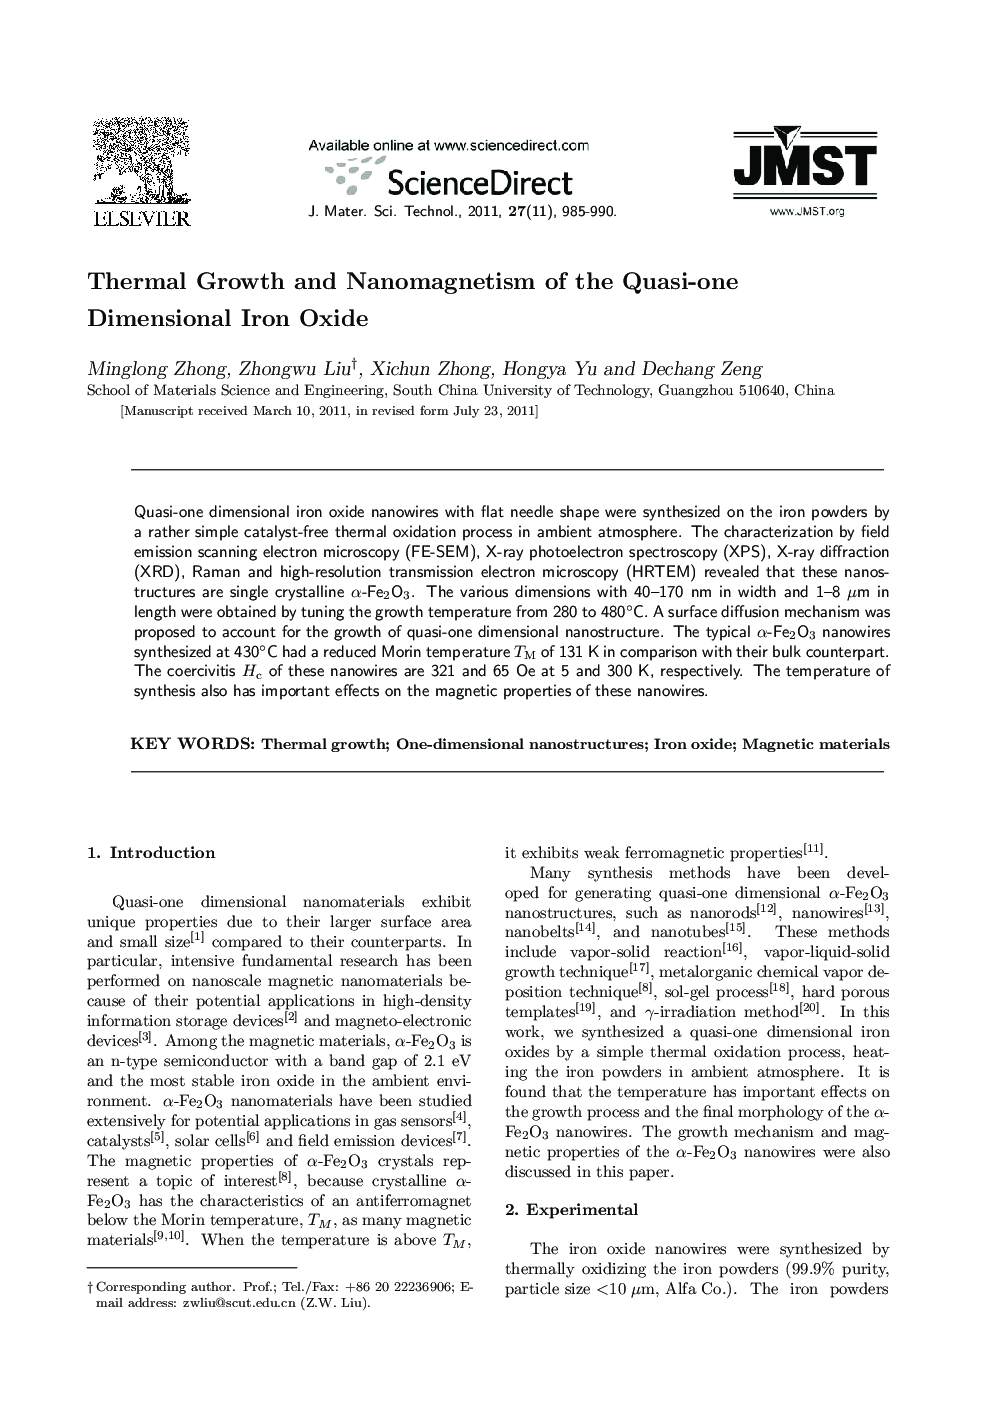 Thermal Growth and Nanomagnetism of the Quasi-one Dimensional Iron Oxide